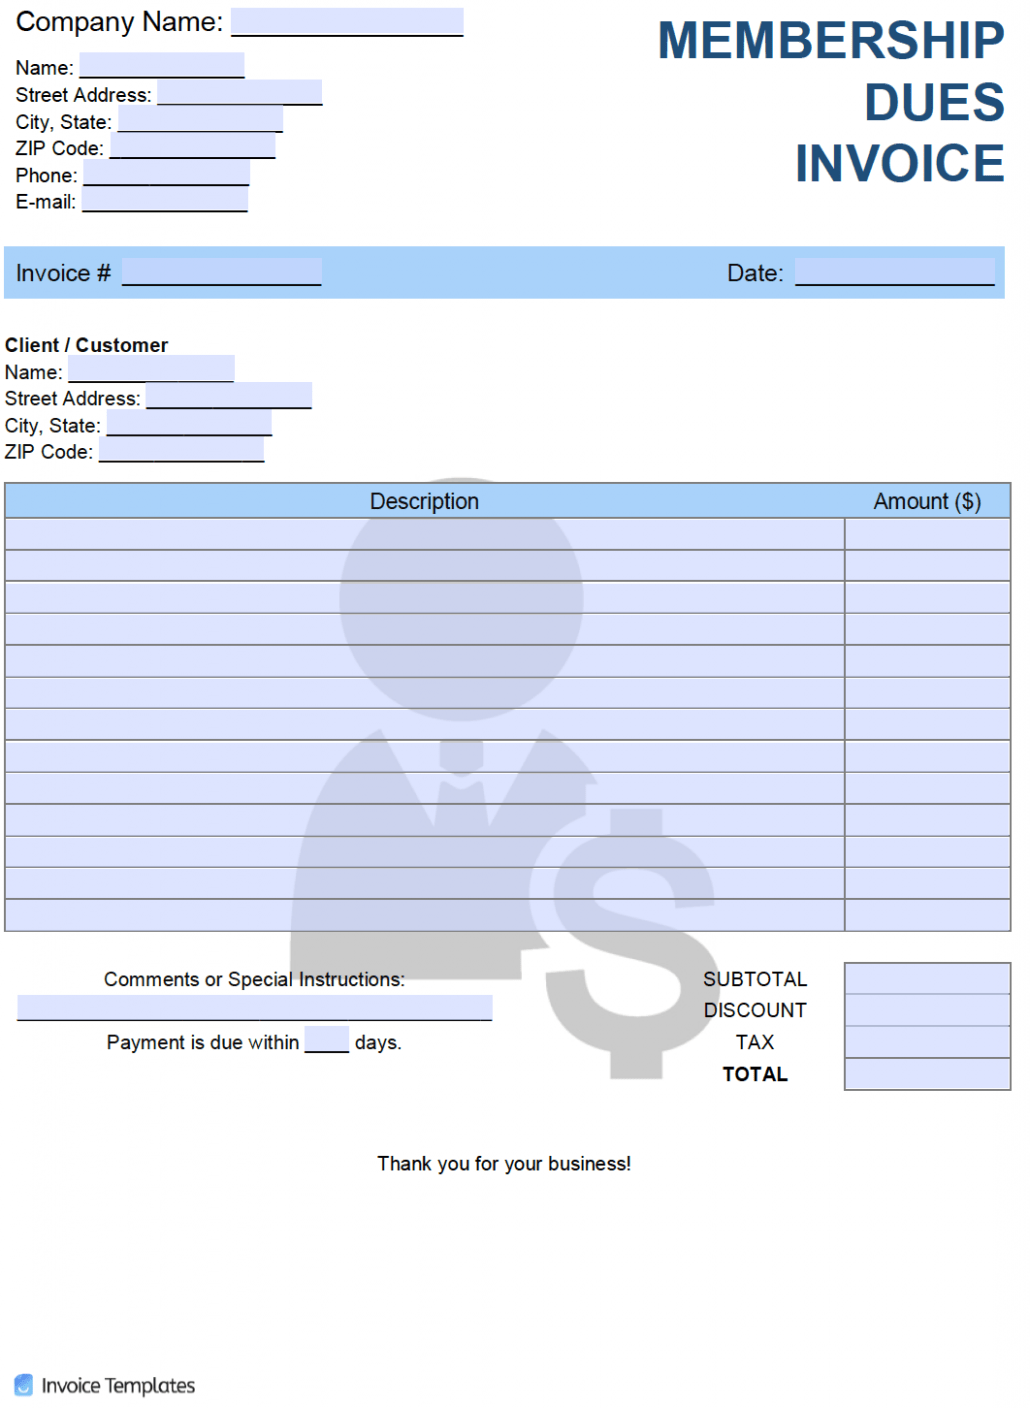 Sample Dues Invoice Template Doc